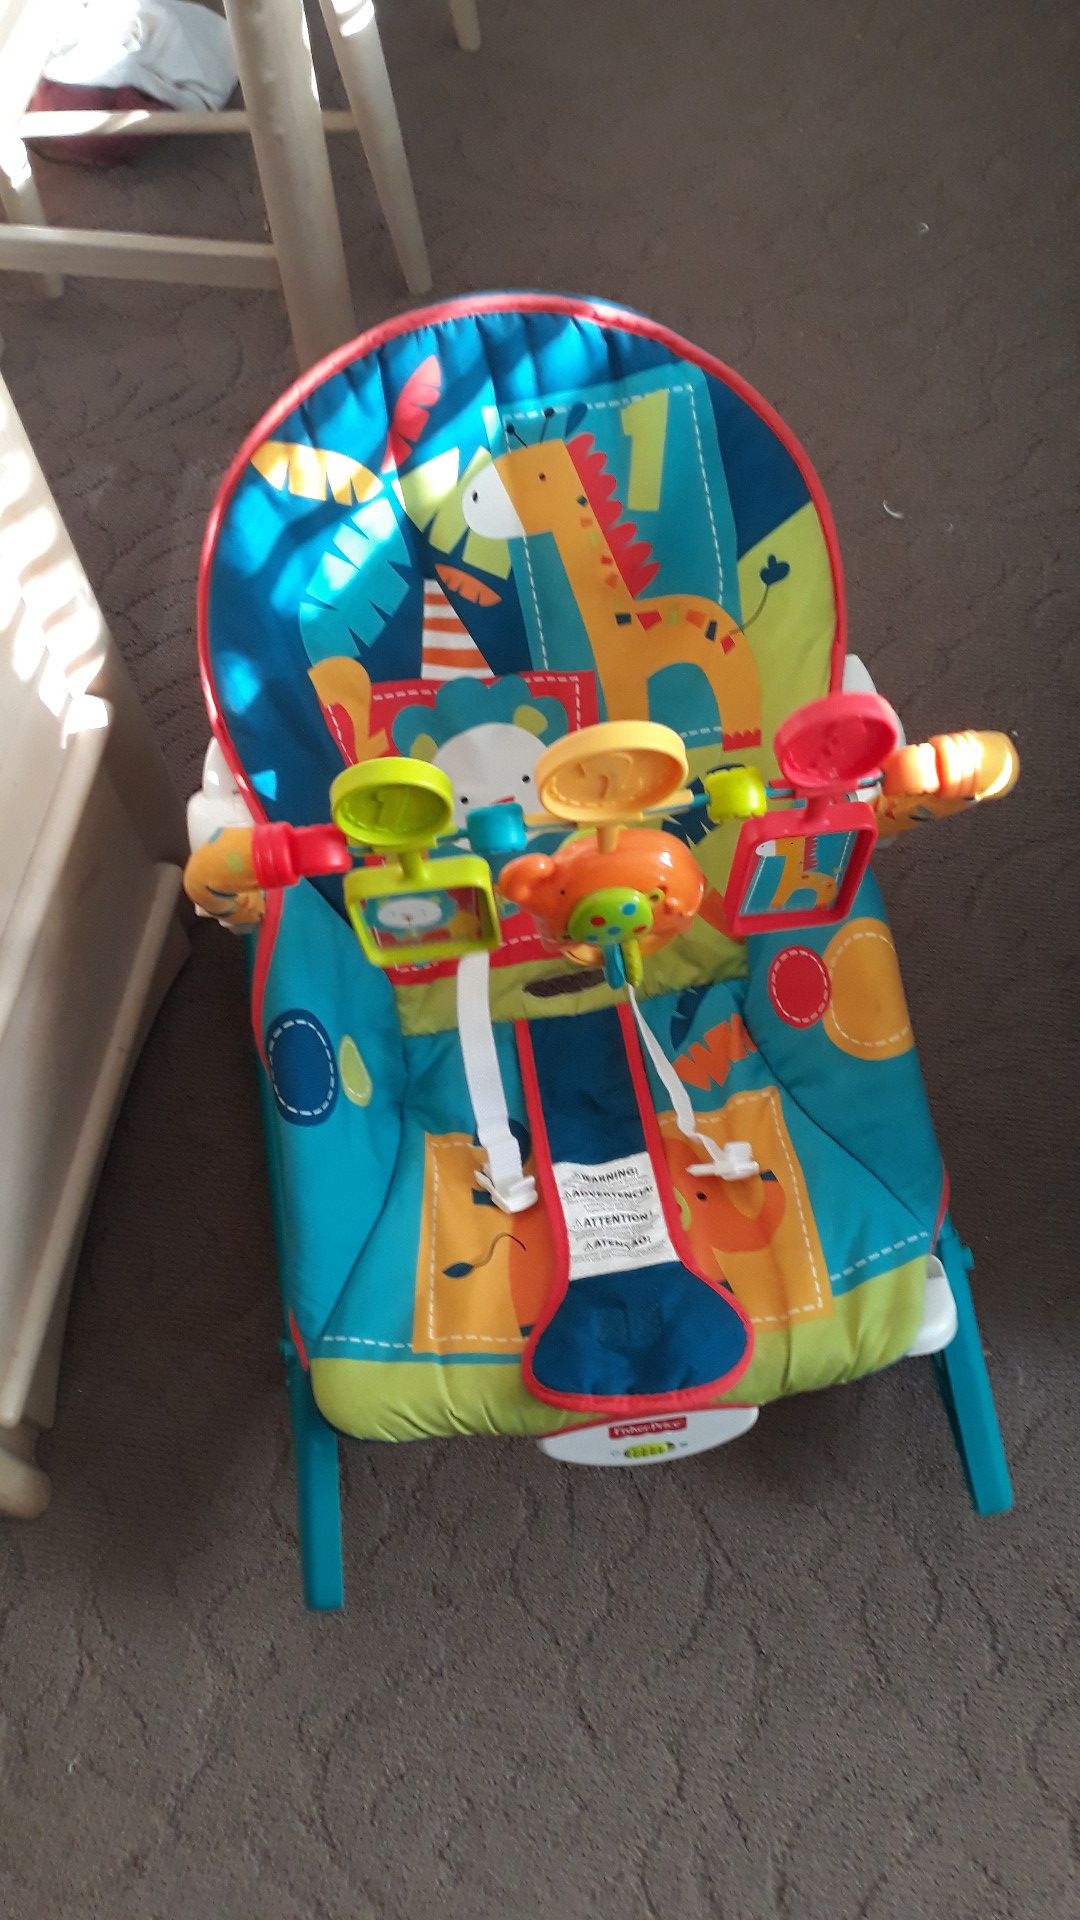 Fisher Price vibrating baby rocker for Sale in Carnation, WA - OfferUp